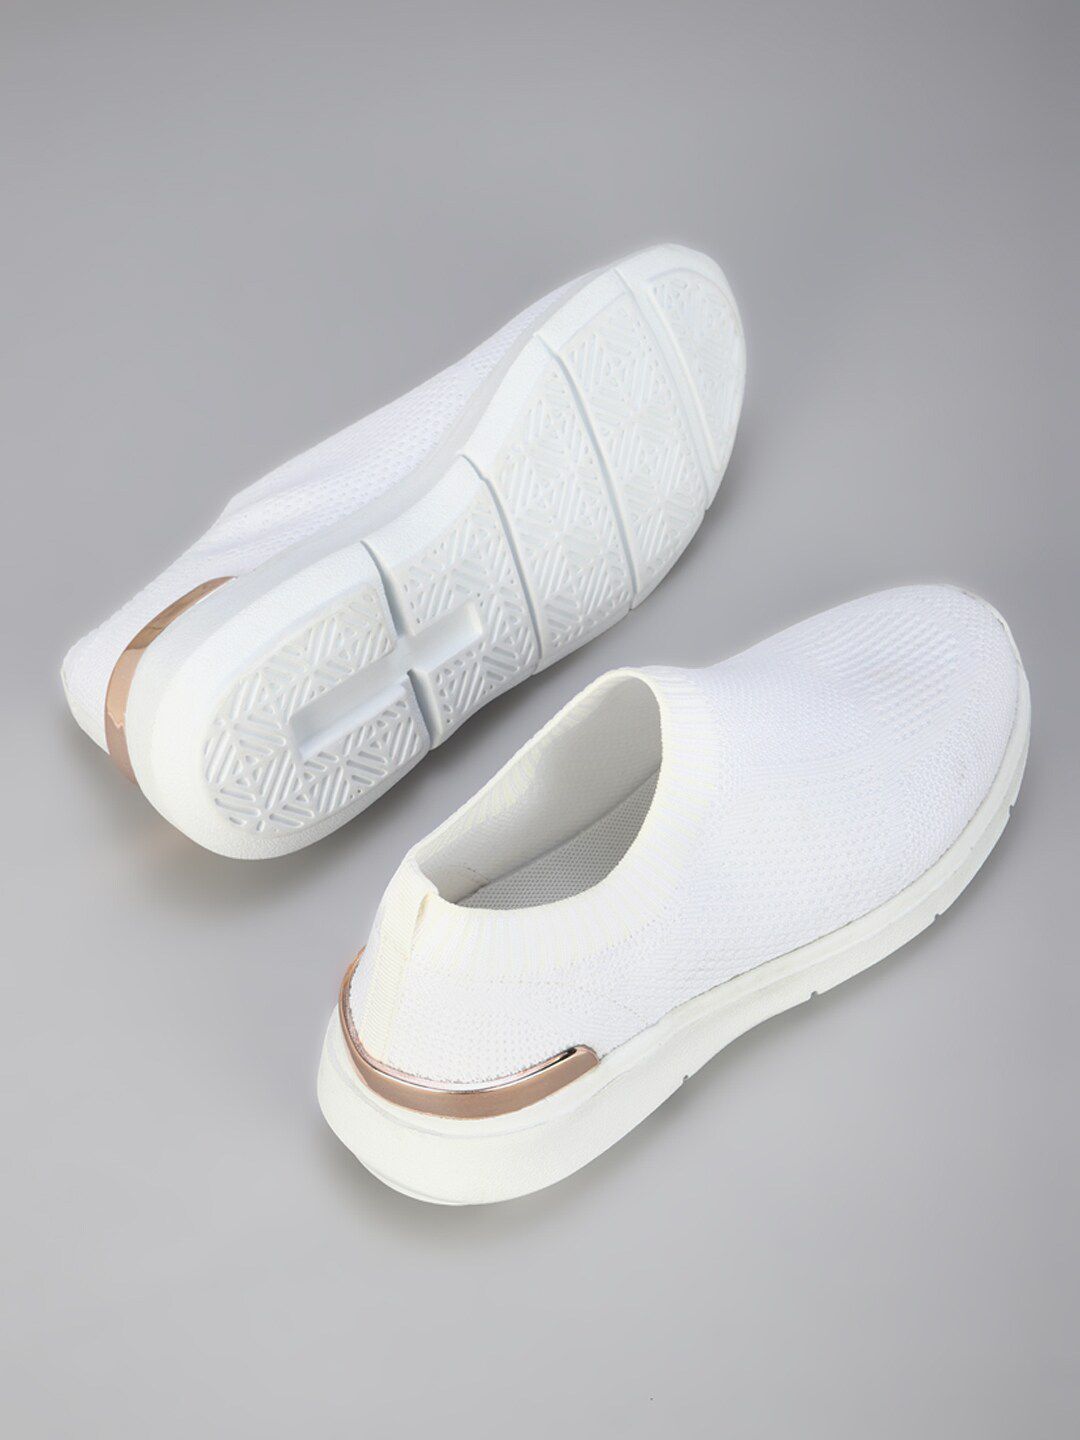 Allen Solly Woman Women White PU Slip-On Sneakers Price in India